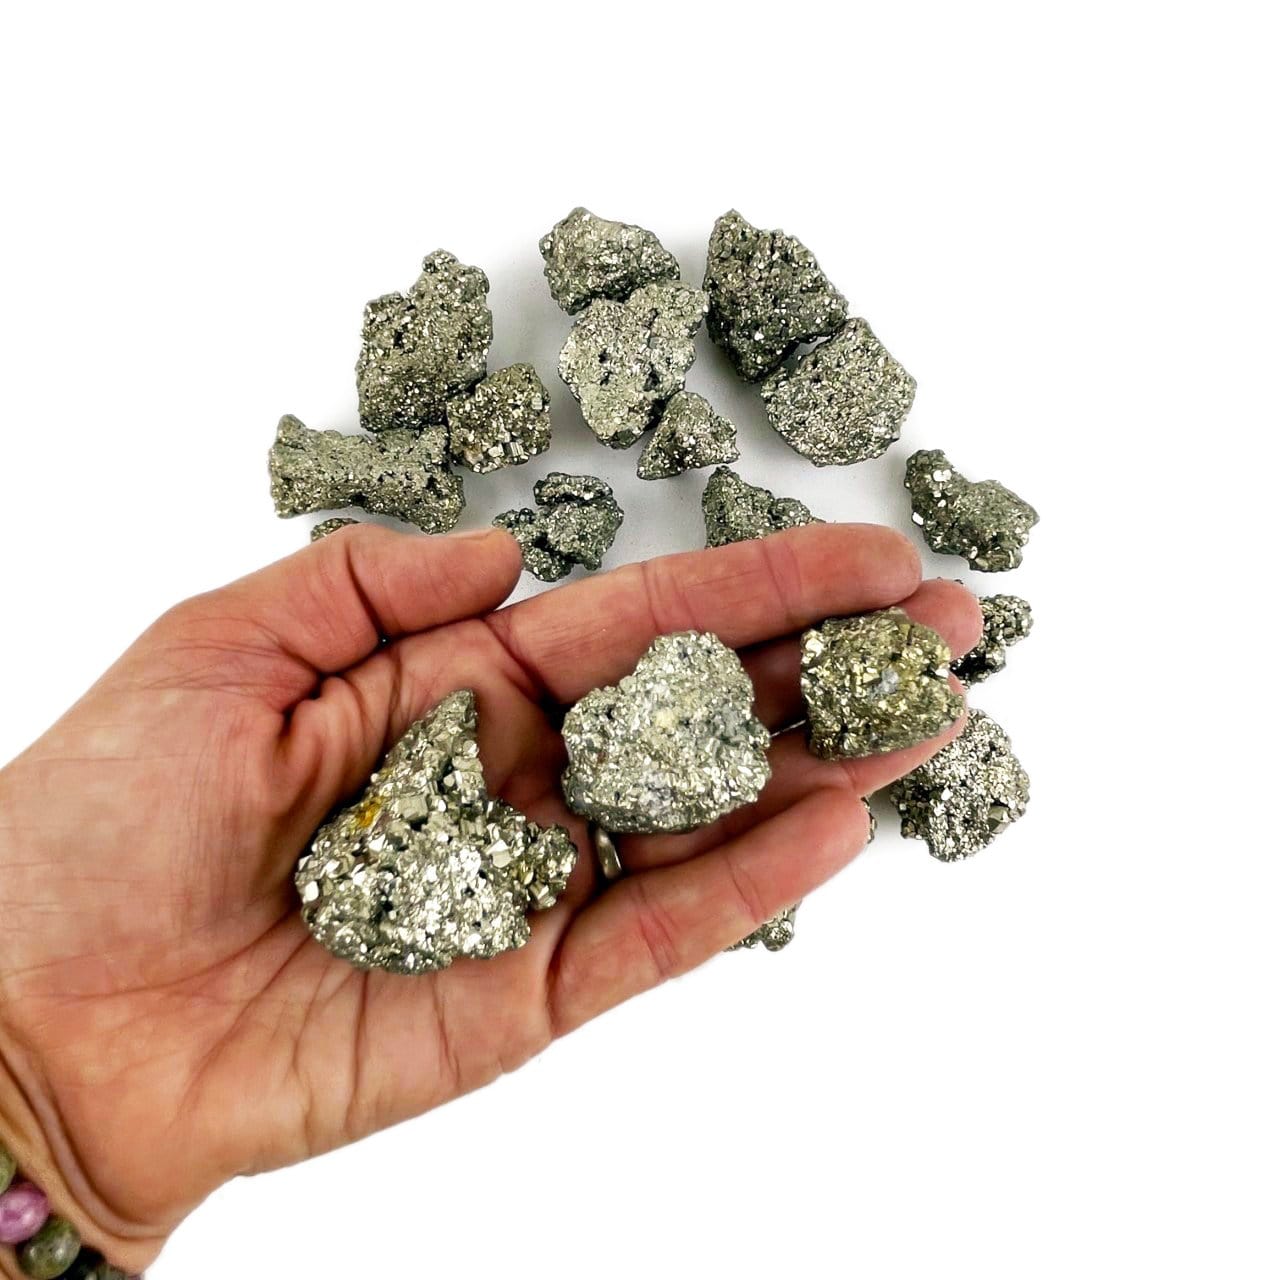 Hand holding 3 Rough Pyrite pieces with more in the background